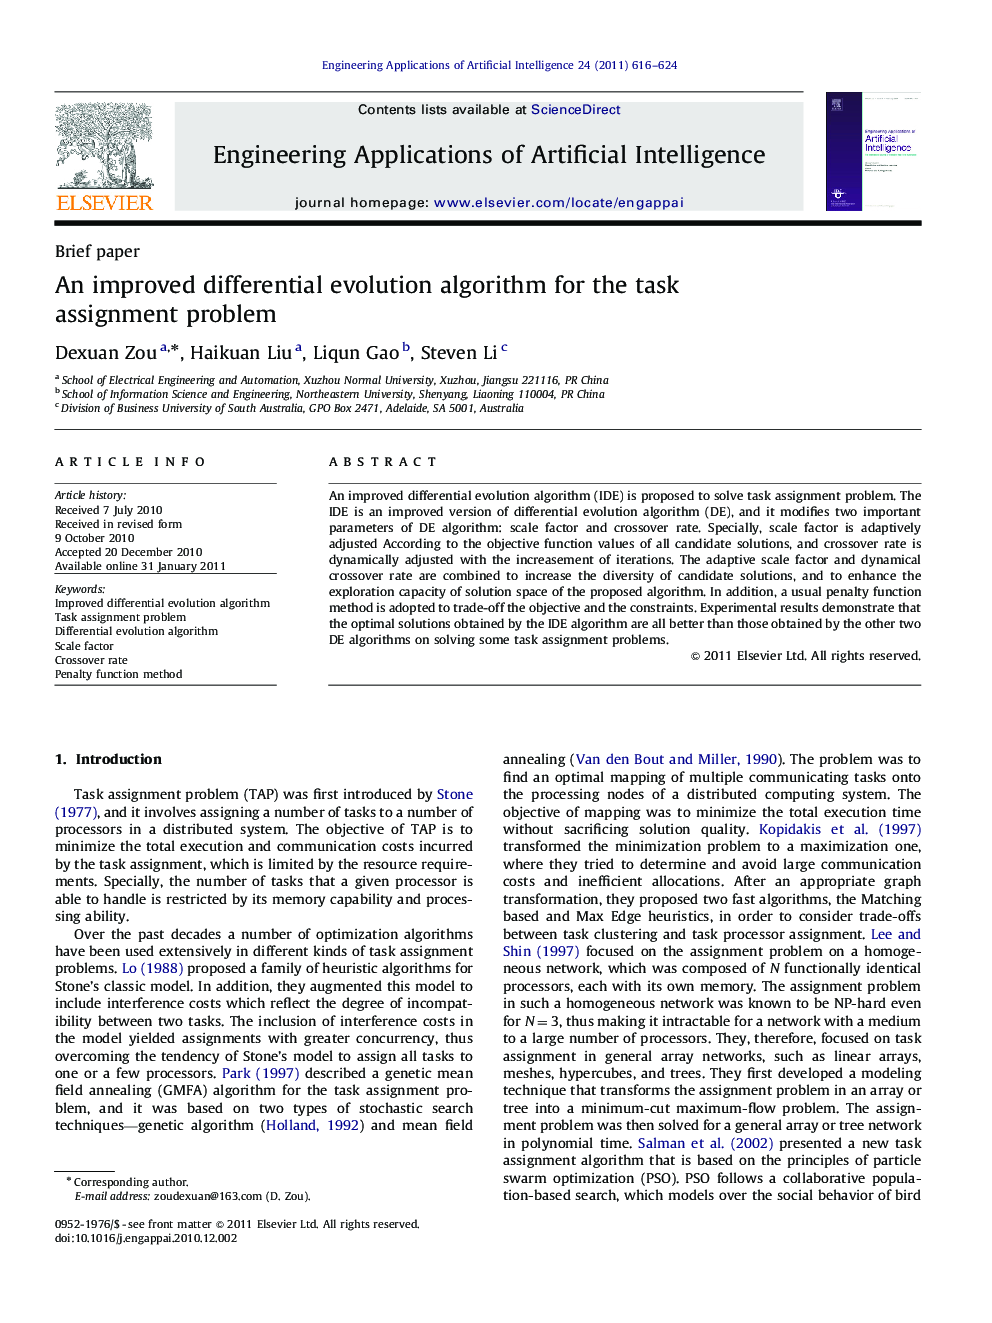 An improved differential evolution algorithm for the task assignment problem